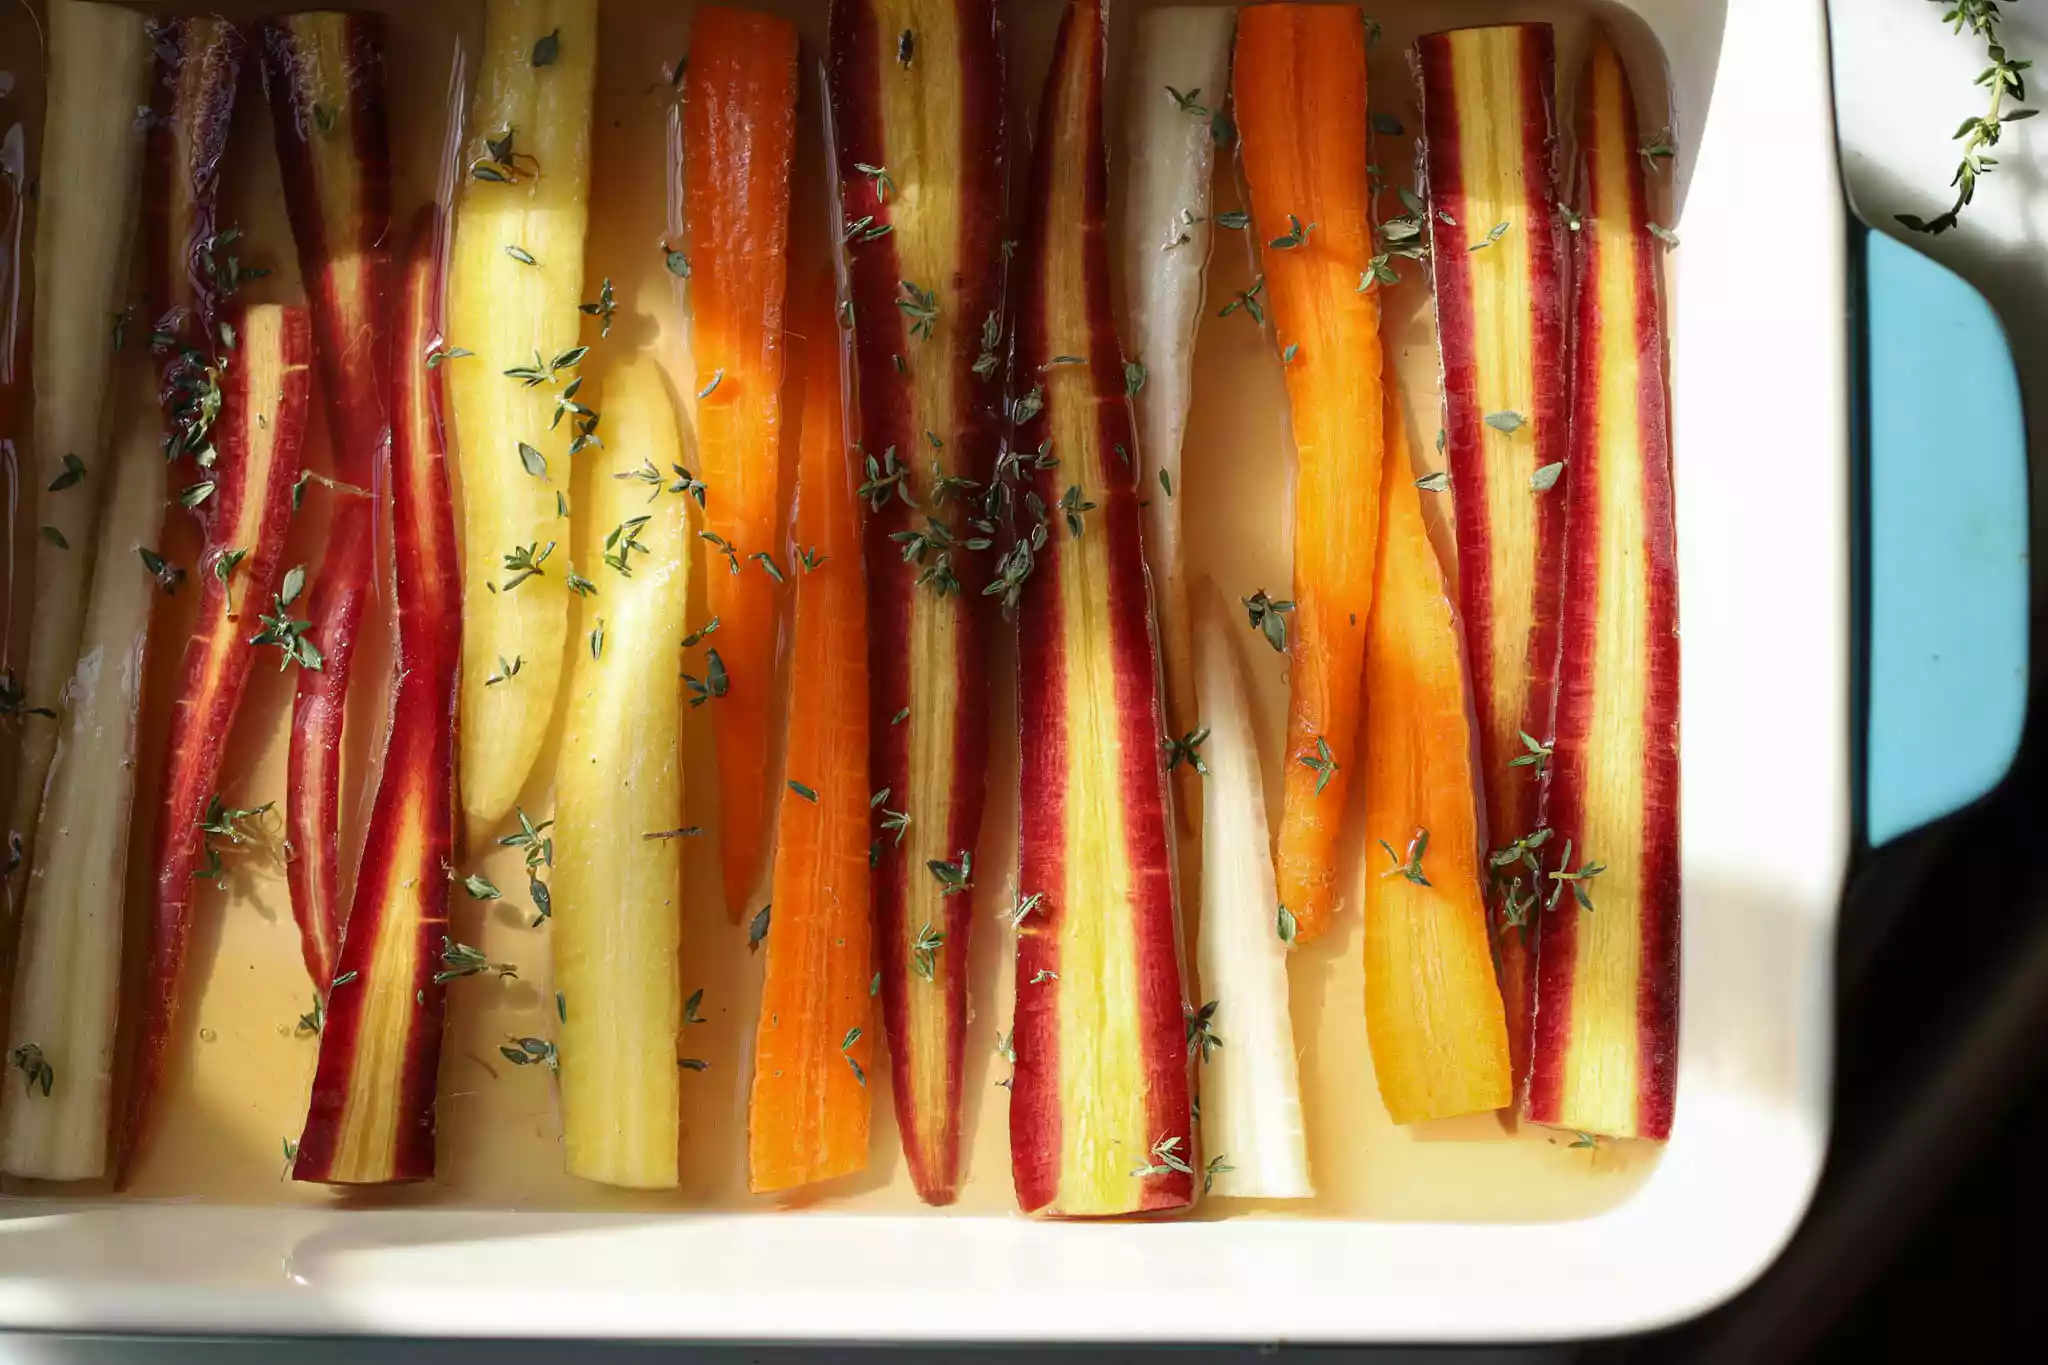 halved, colorful carrots are arranged on a blue baking dish and sprinkled with thyme